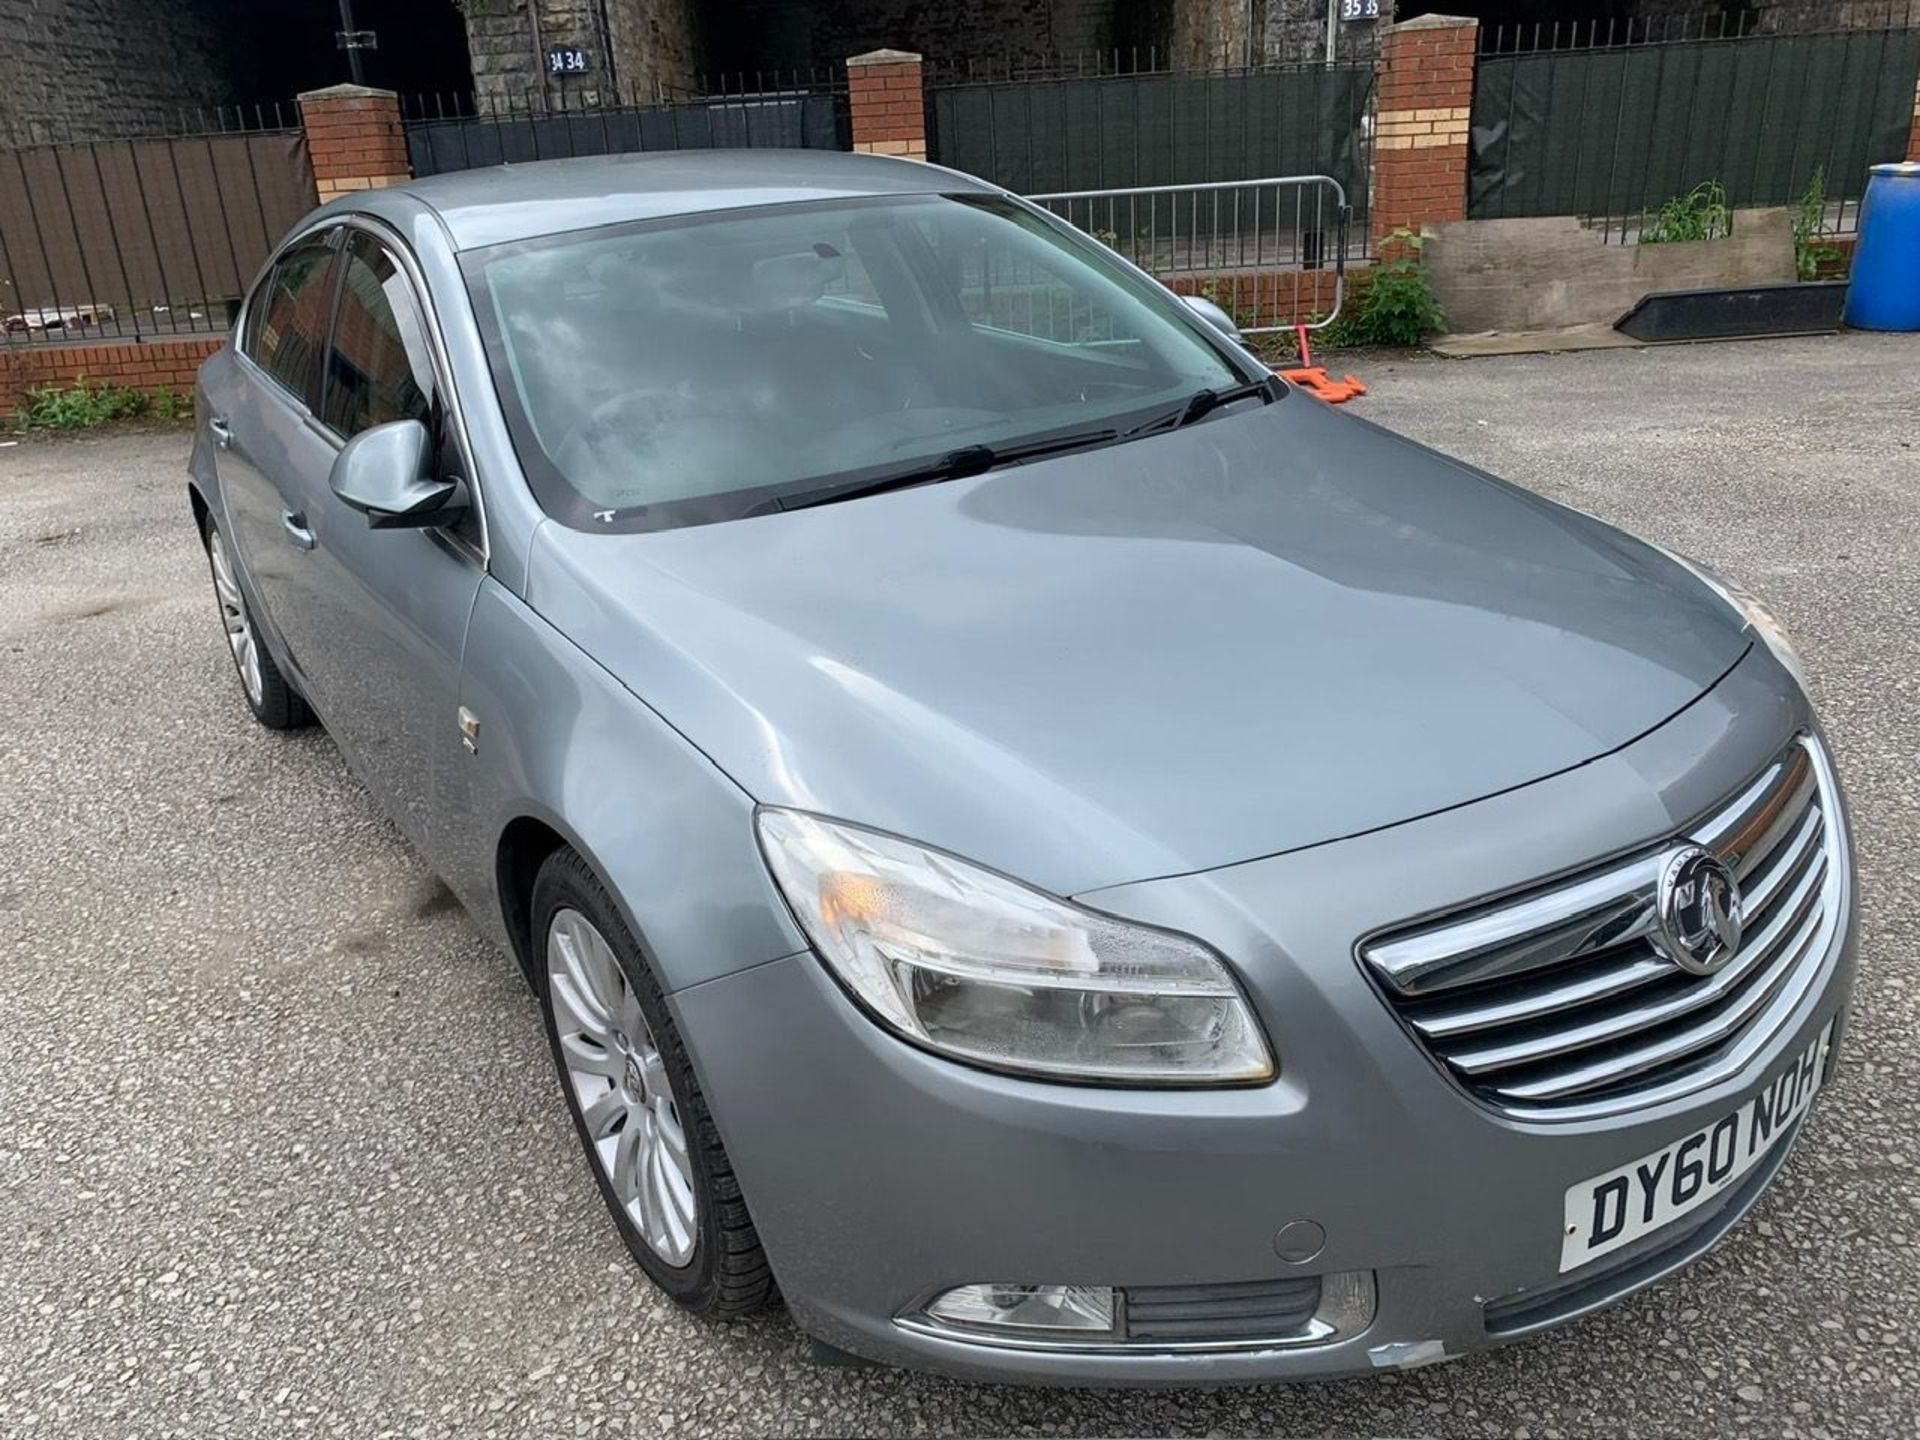 DY60 NOH VAUXHALL INSIGNIA Silver Diesel First Registration: 21.09.10 Mot: 23.01.25 Mileage: 122,856 - Image 2 of 10